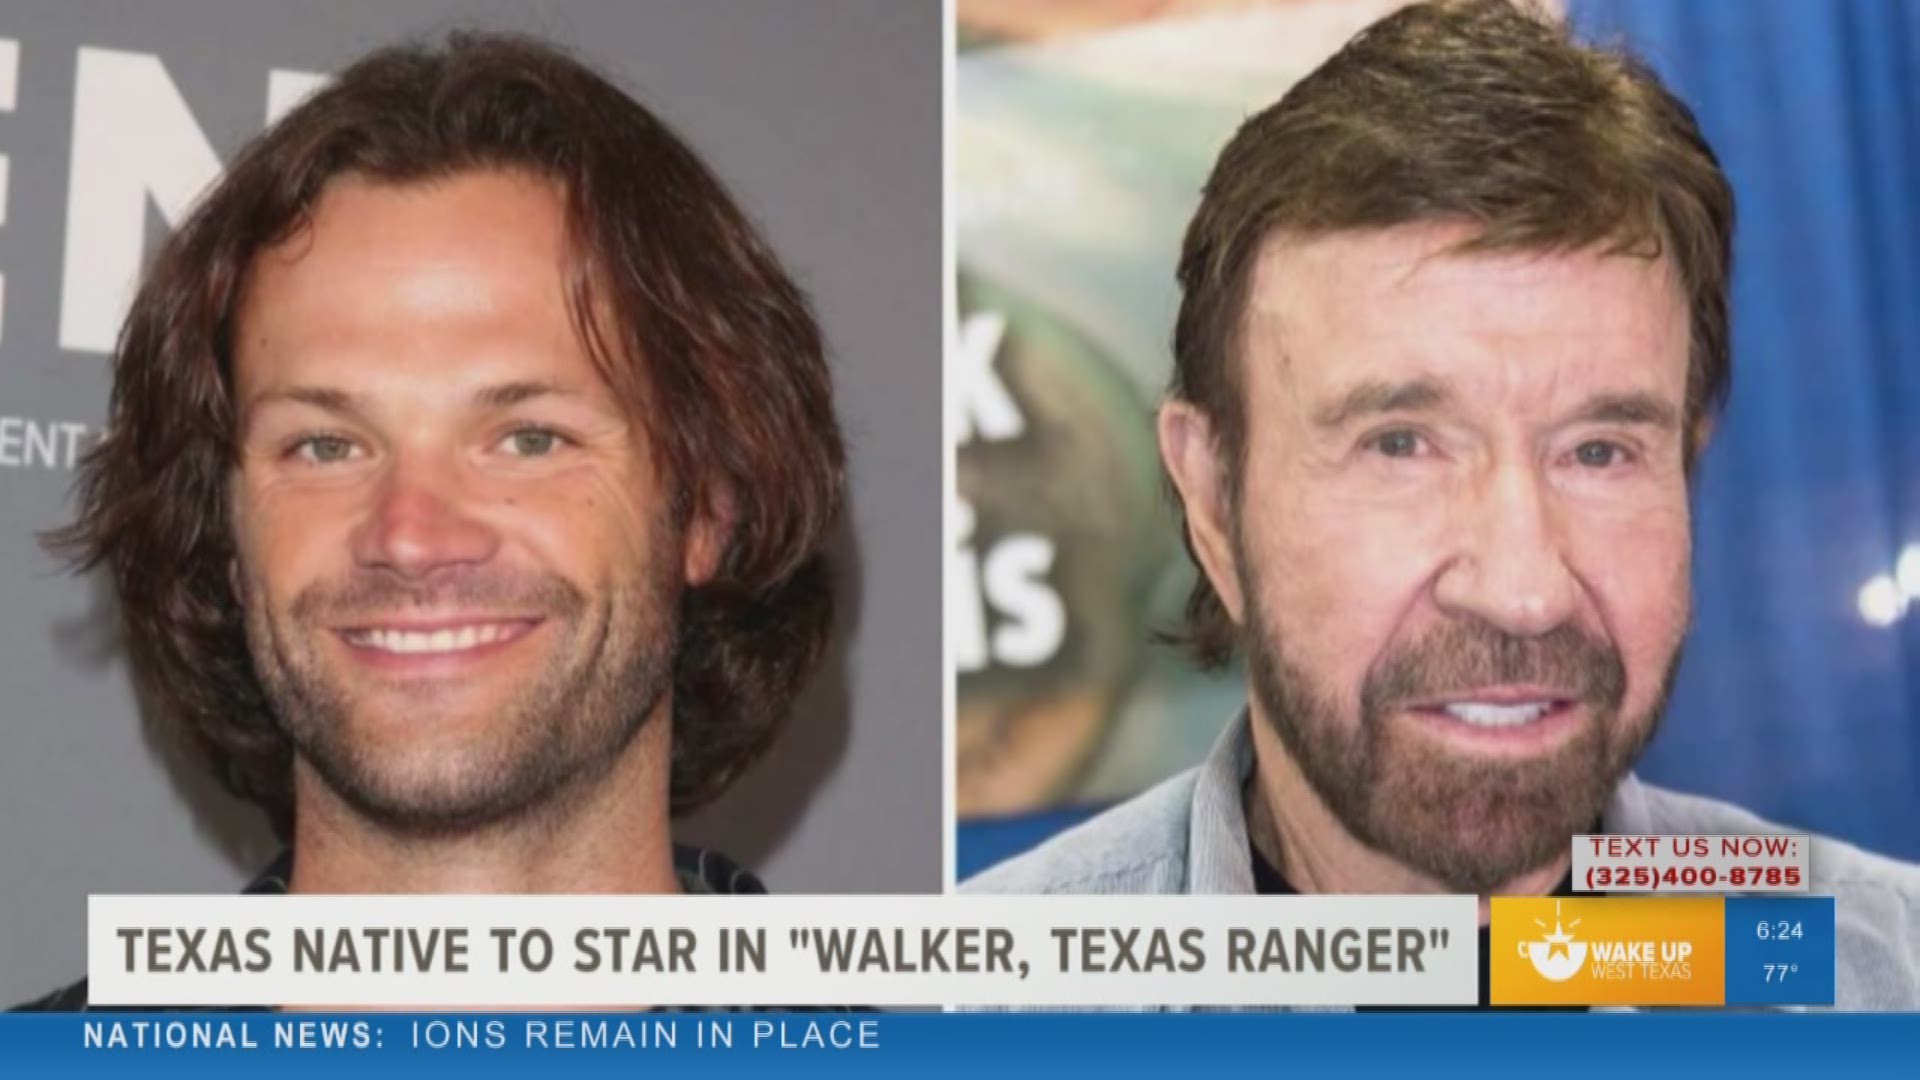 Our Malik Mingo shared what people said on social media about a "Walker, Texas Ranger" reboot, which will star Jared Padalecki.